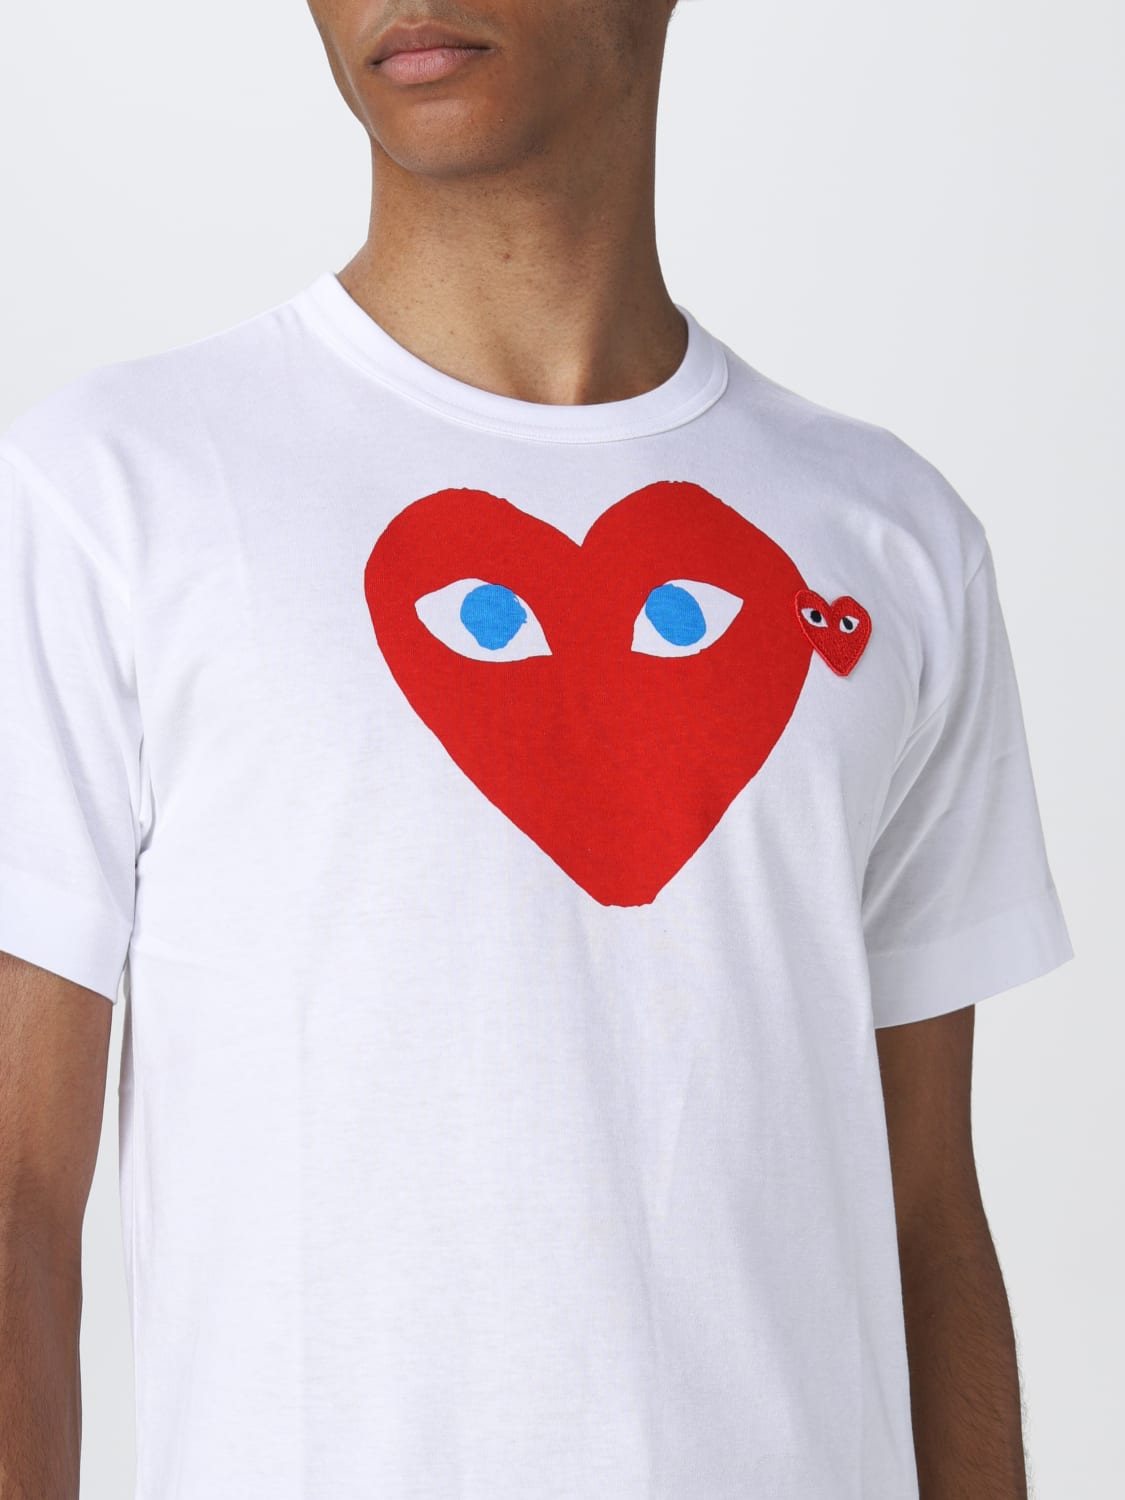 Tag et bad modstå Kilauea Mountain COMME DES GARCONS PLAY: t-shirt for man - White | Comme Des Garcons Play t- shirt P1T086 online on GIGLIO.COM